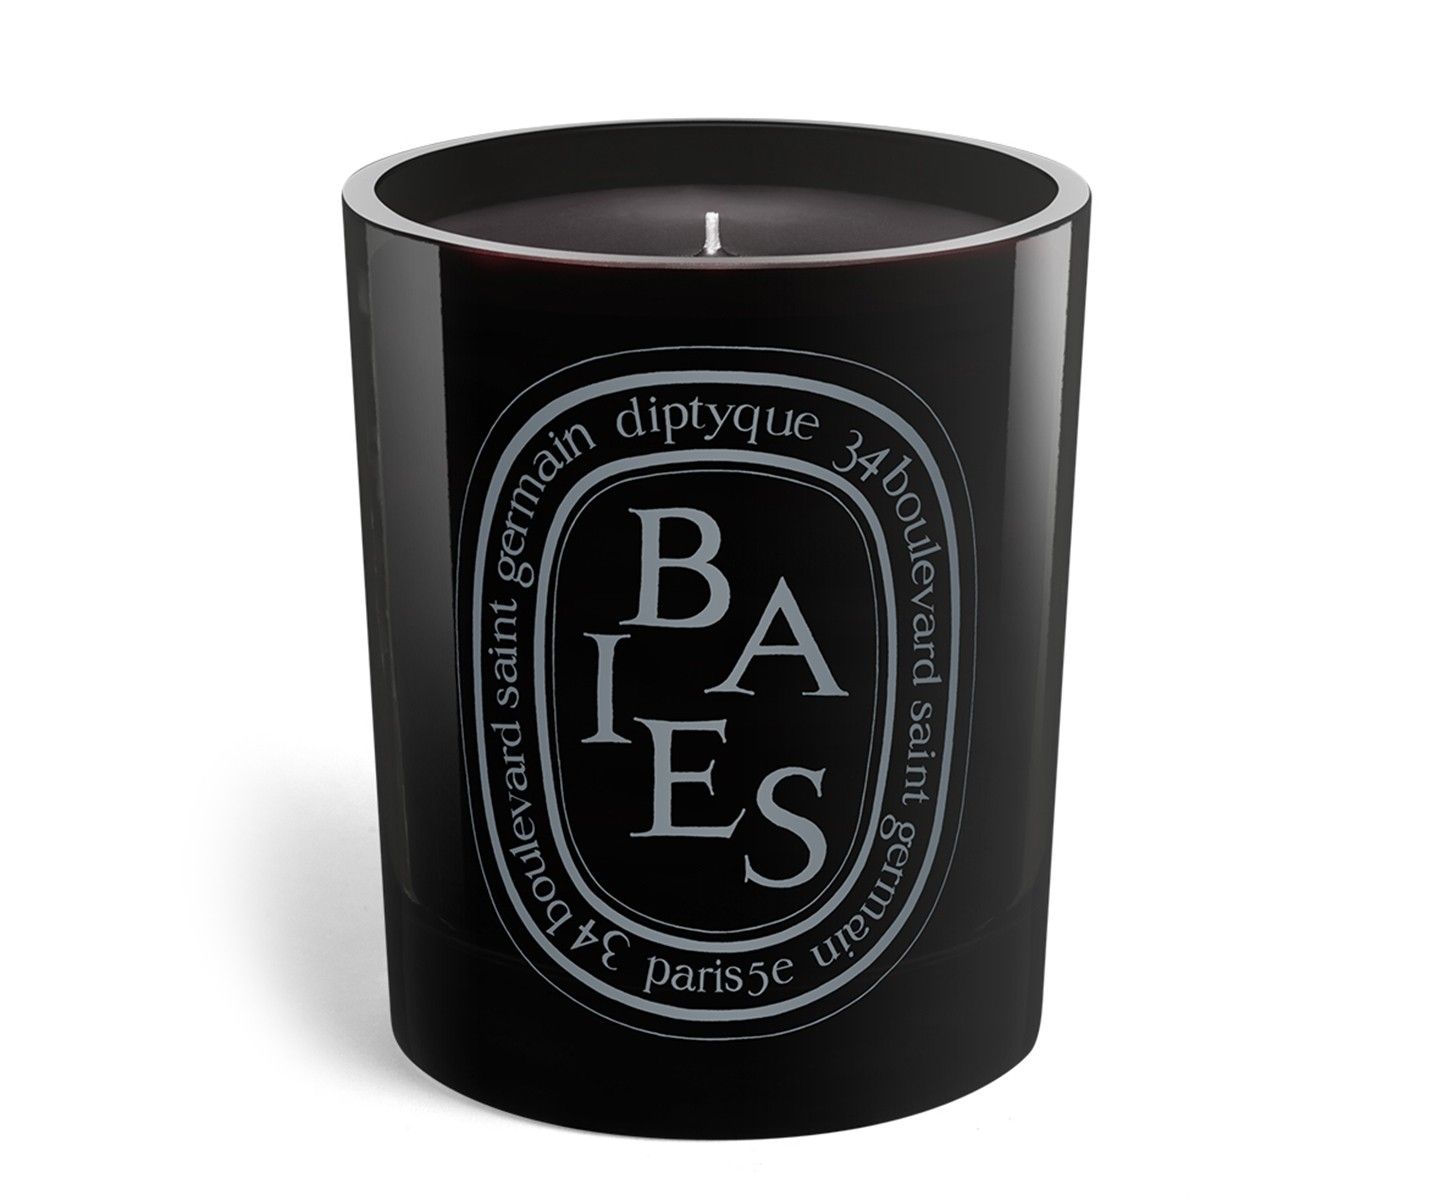 Baies / Berries candle, Home Decor, Candle Decor, Diptyque Candles, Neutral Decor | diptyque (US)